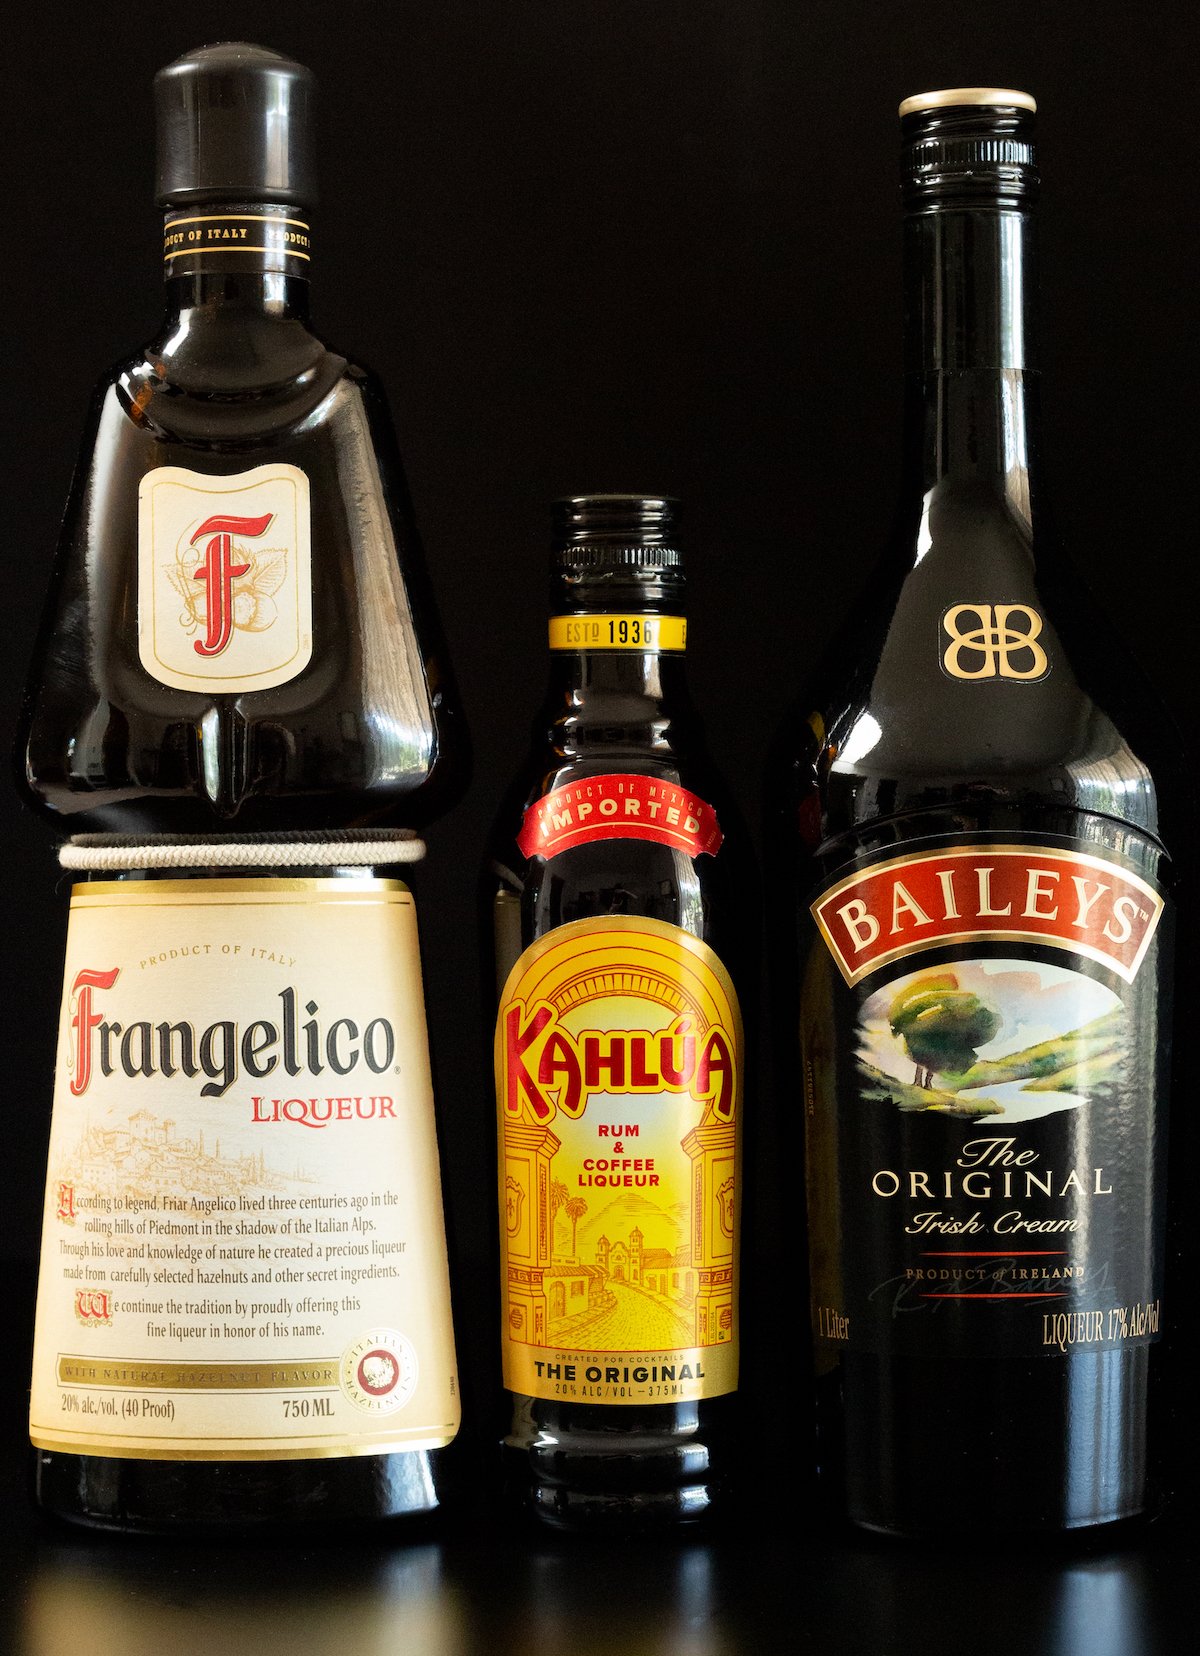 A bottle of Frangelico, Kahlua, and Bailey's Irish Cream on a black background.